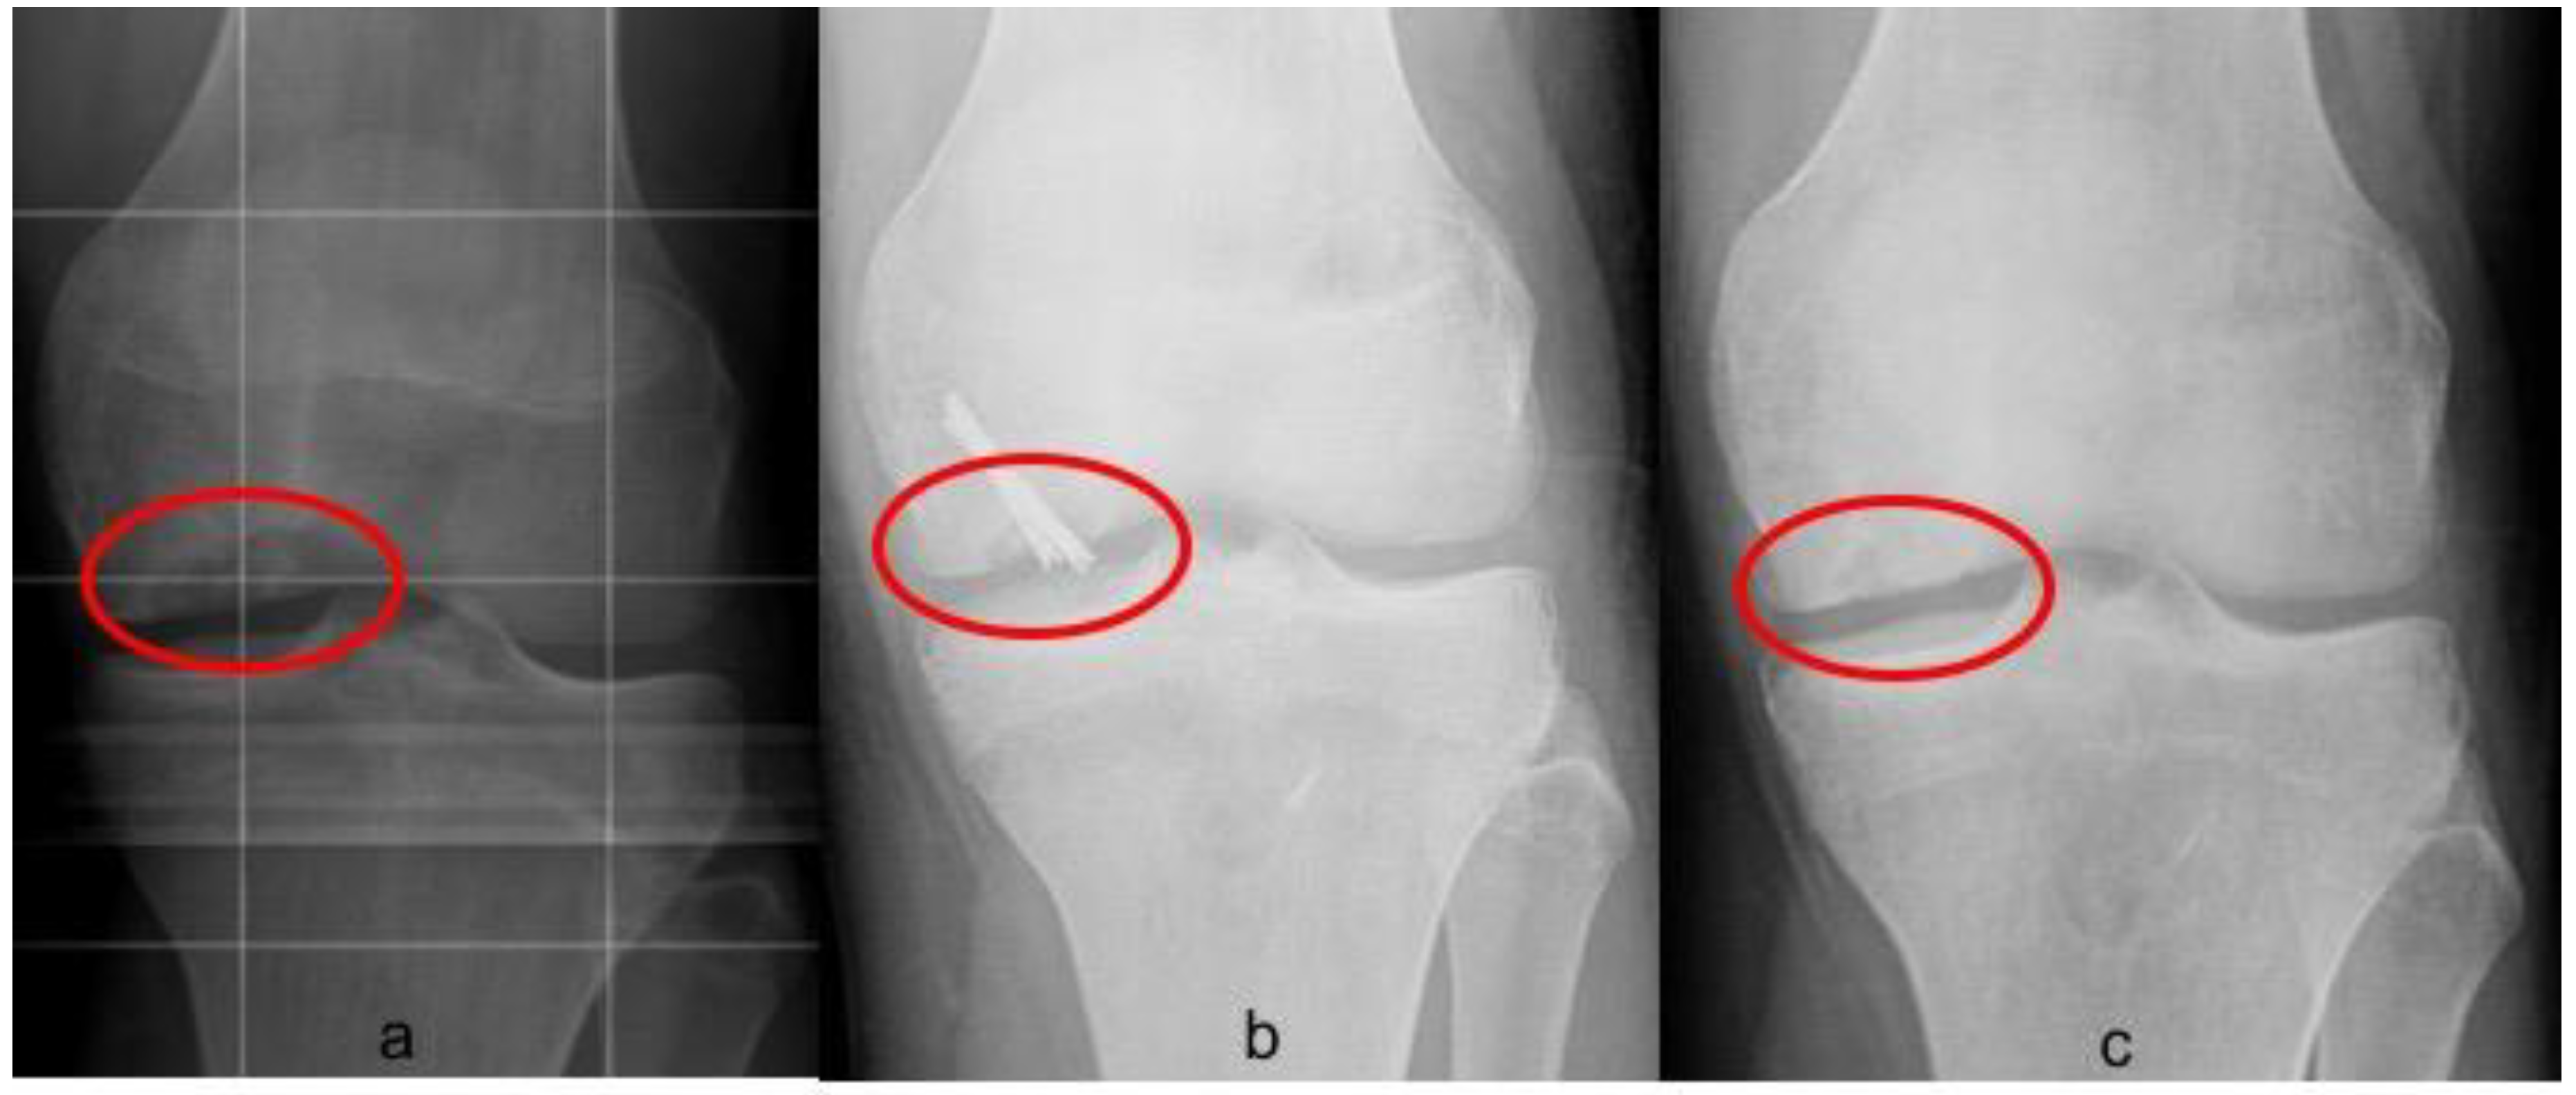 osteochondritis dissecans of the knee